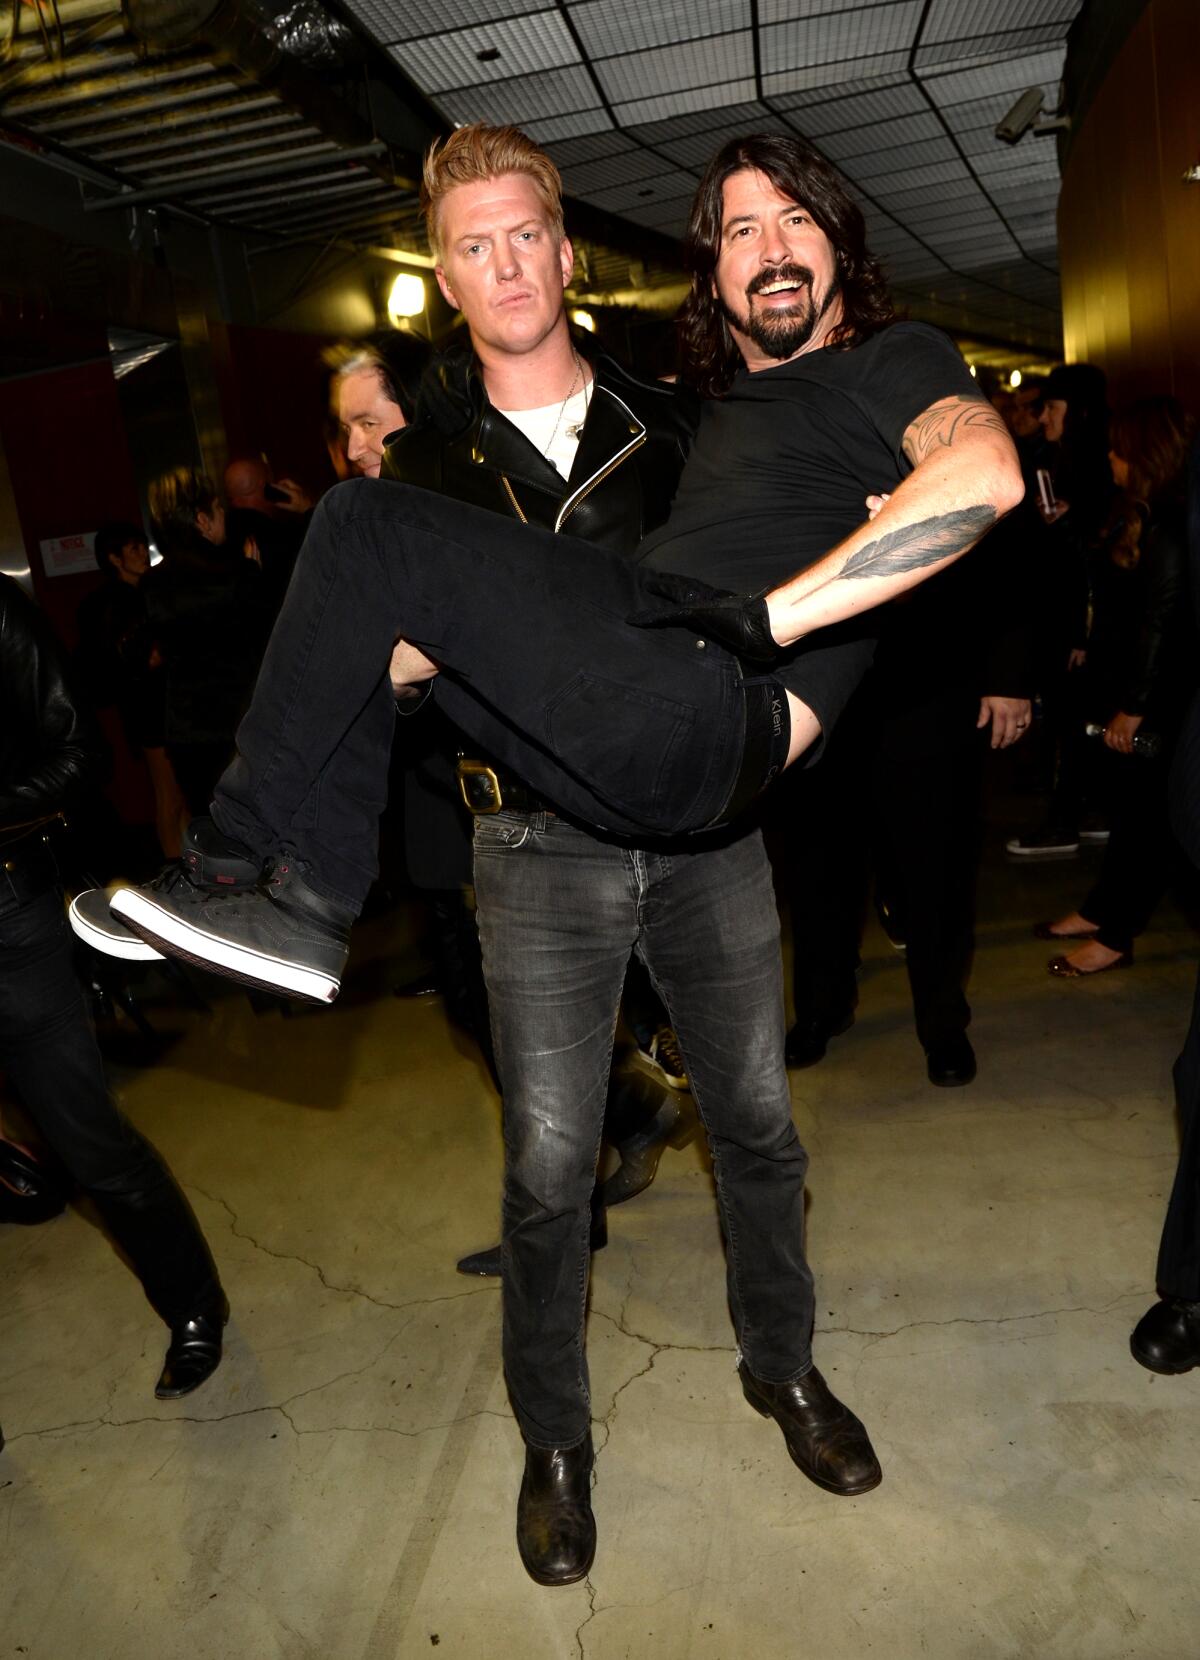 Josh Homme and Dave Grohl at the 56th Grammy Awards in 2014.